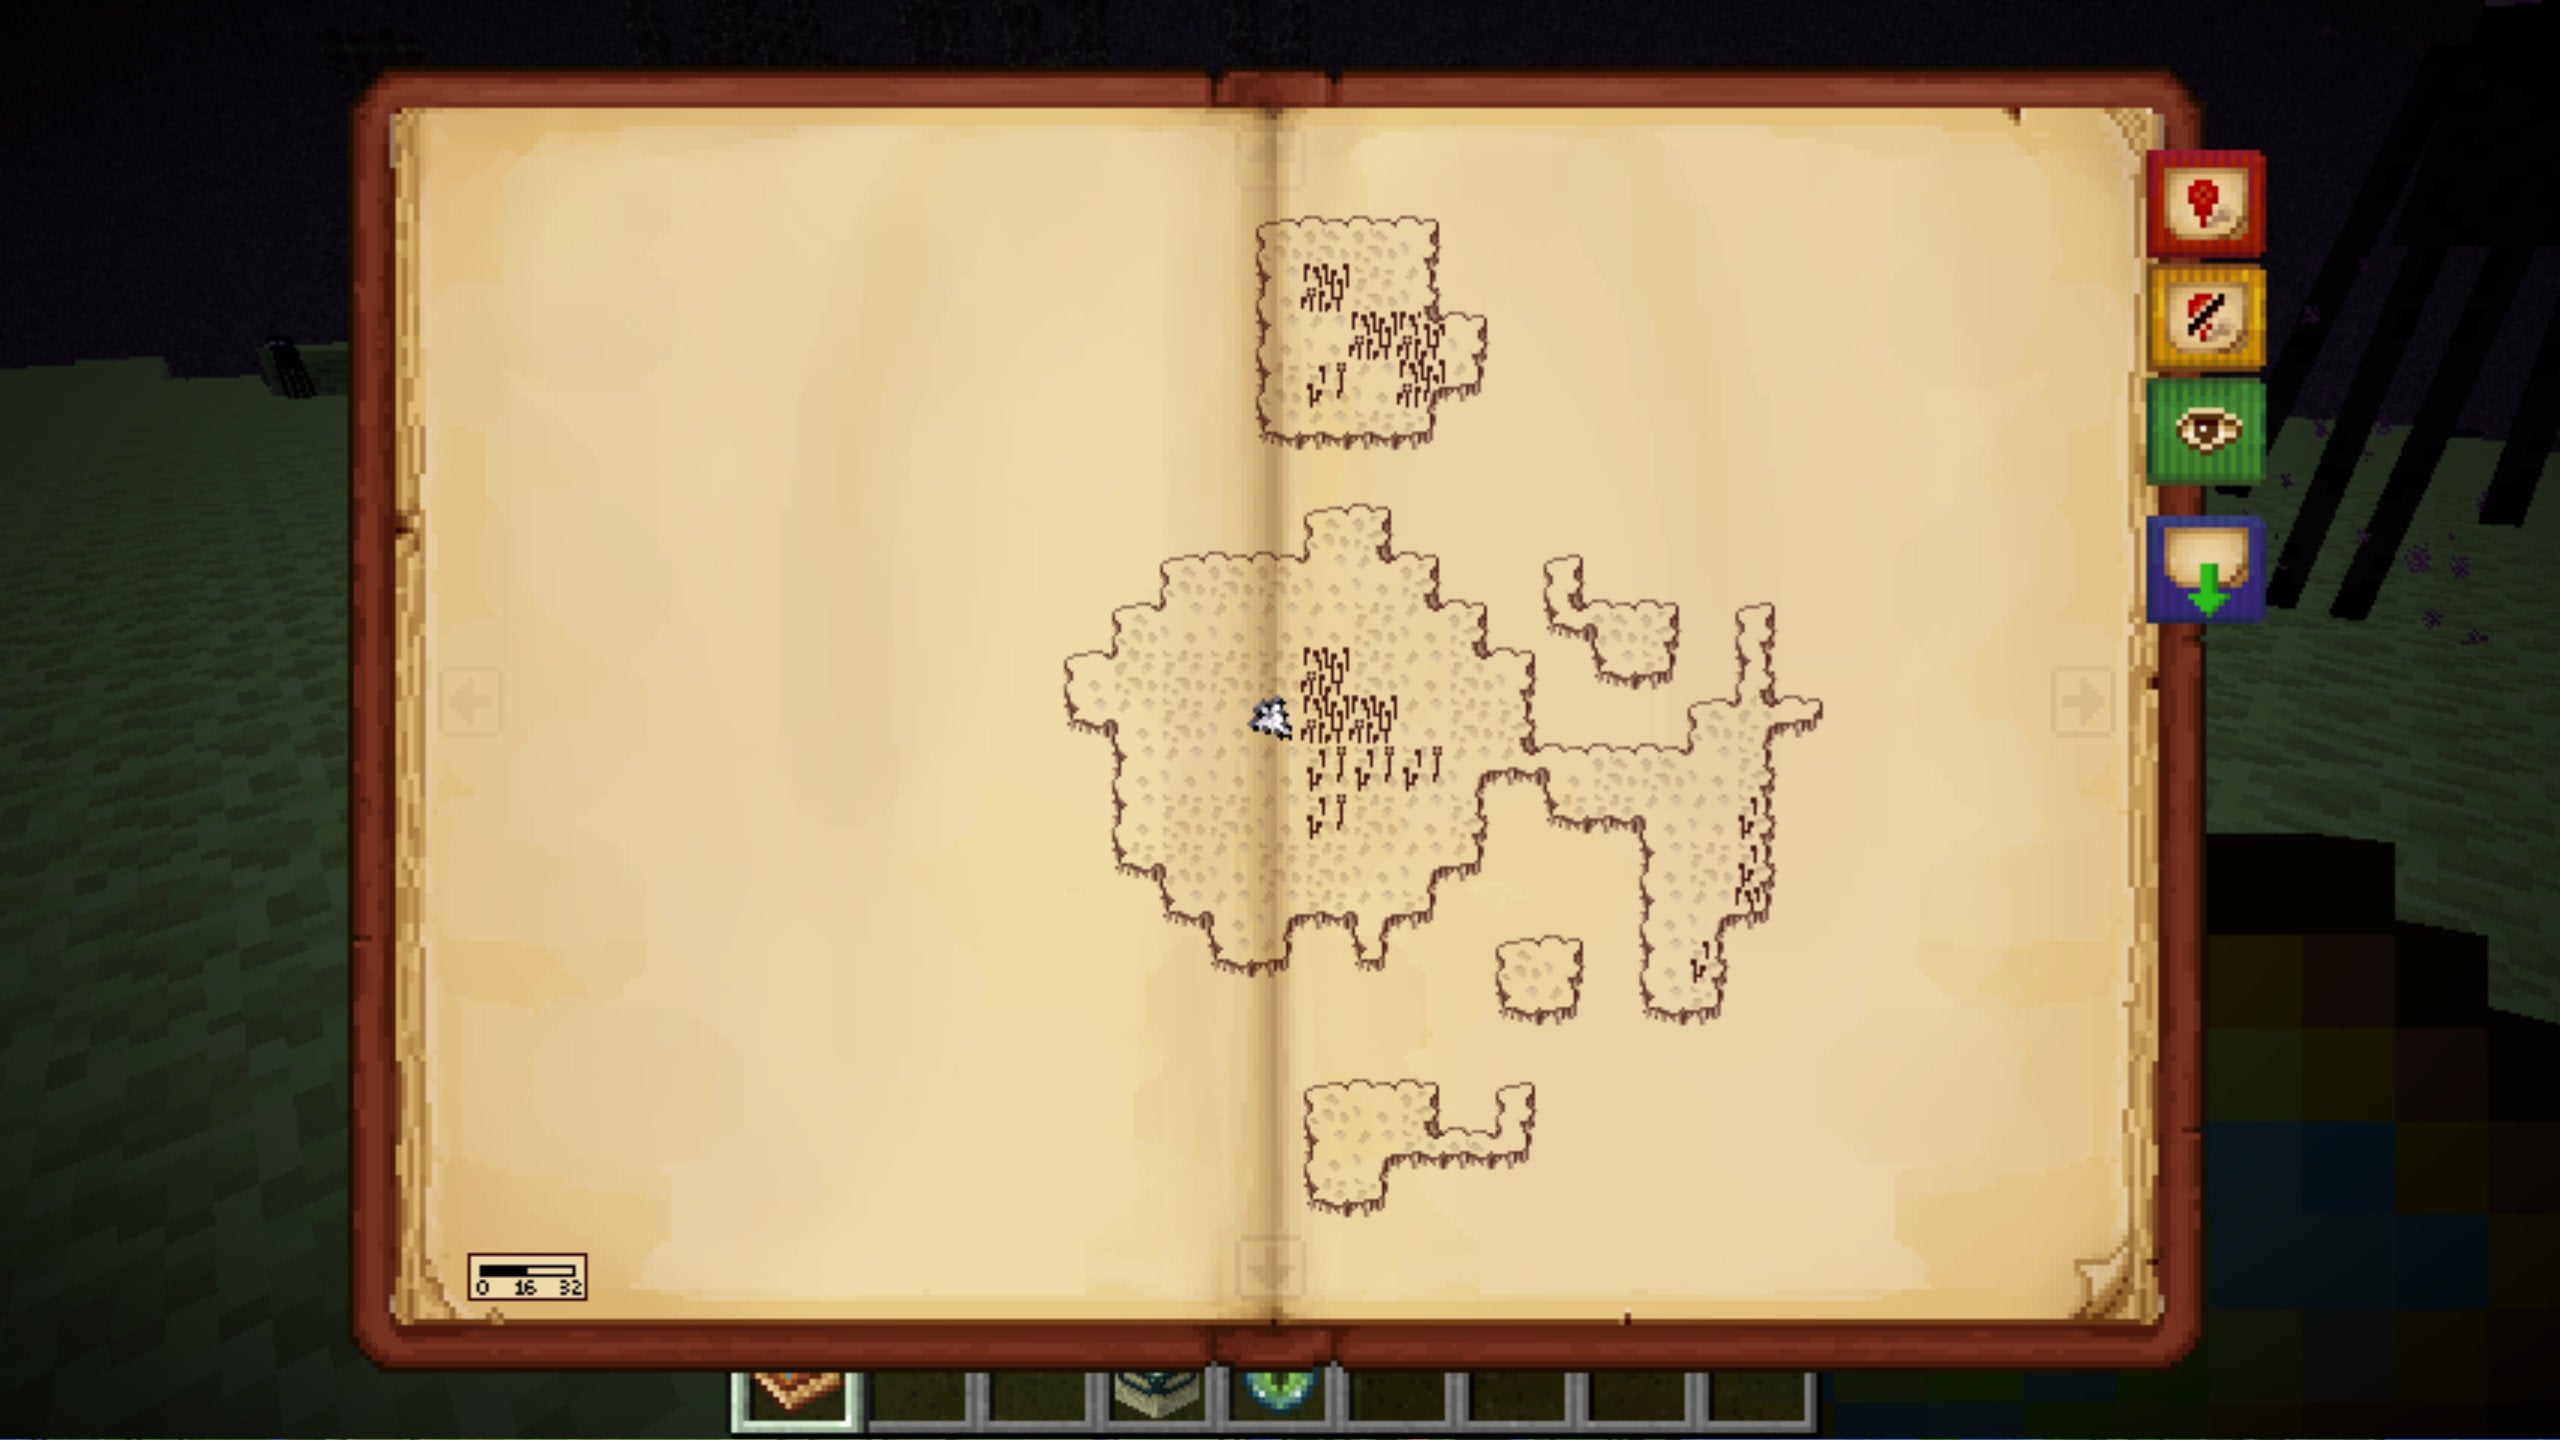 The Antique Atlas mod item in Minecraft, which shows a map of the world inside a book.